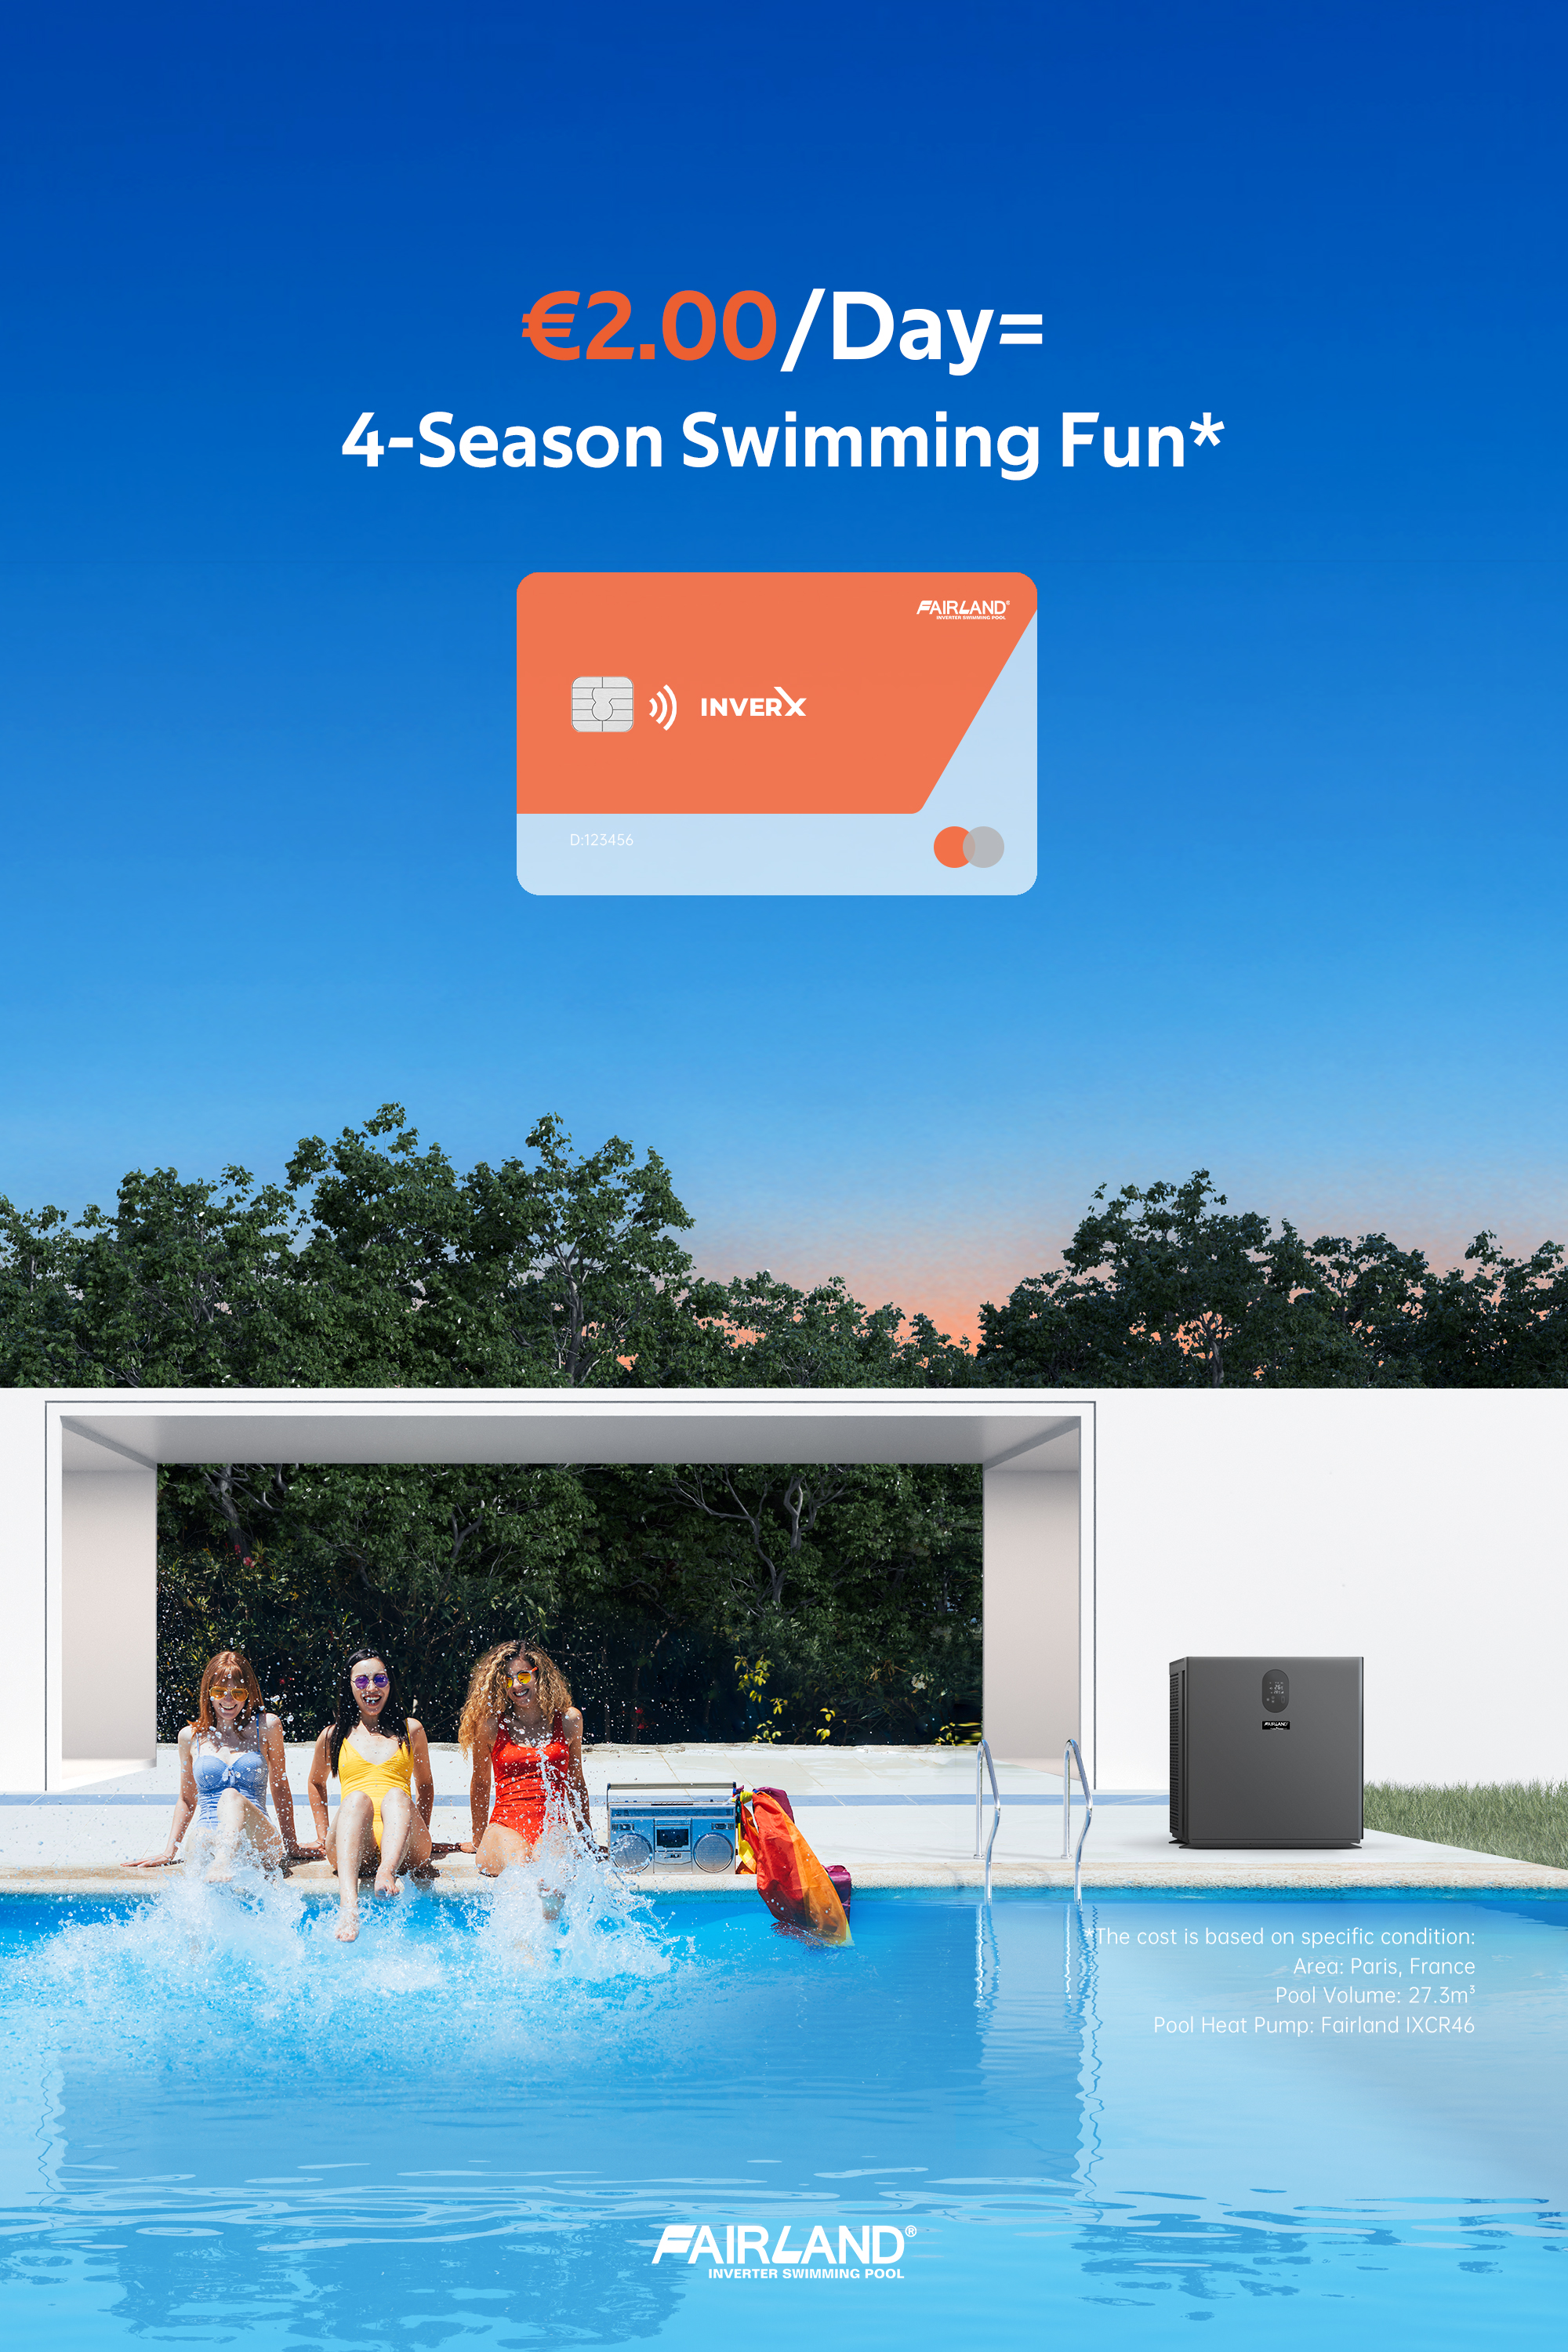 Fairland INVERX brings 4-season swimming fun at the lowest cost and highest energy efficiency